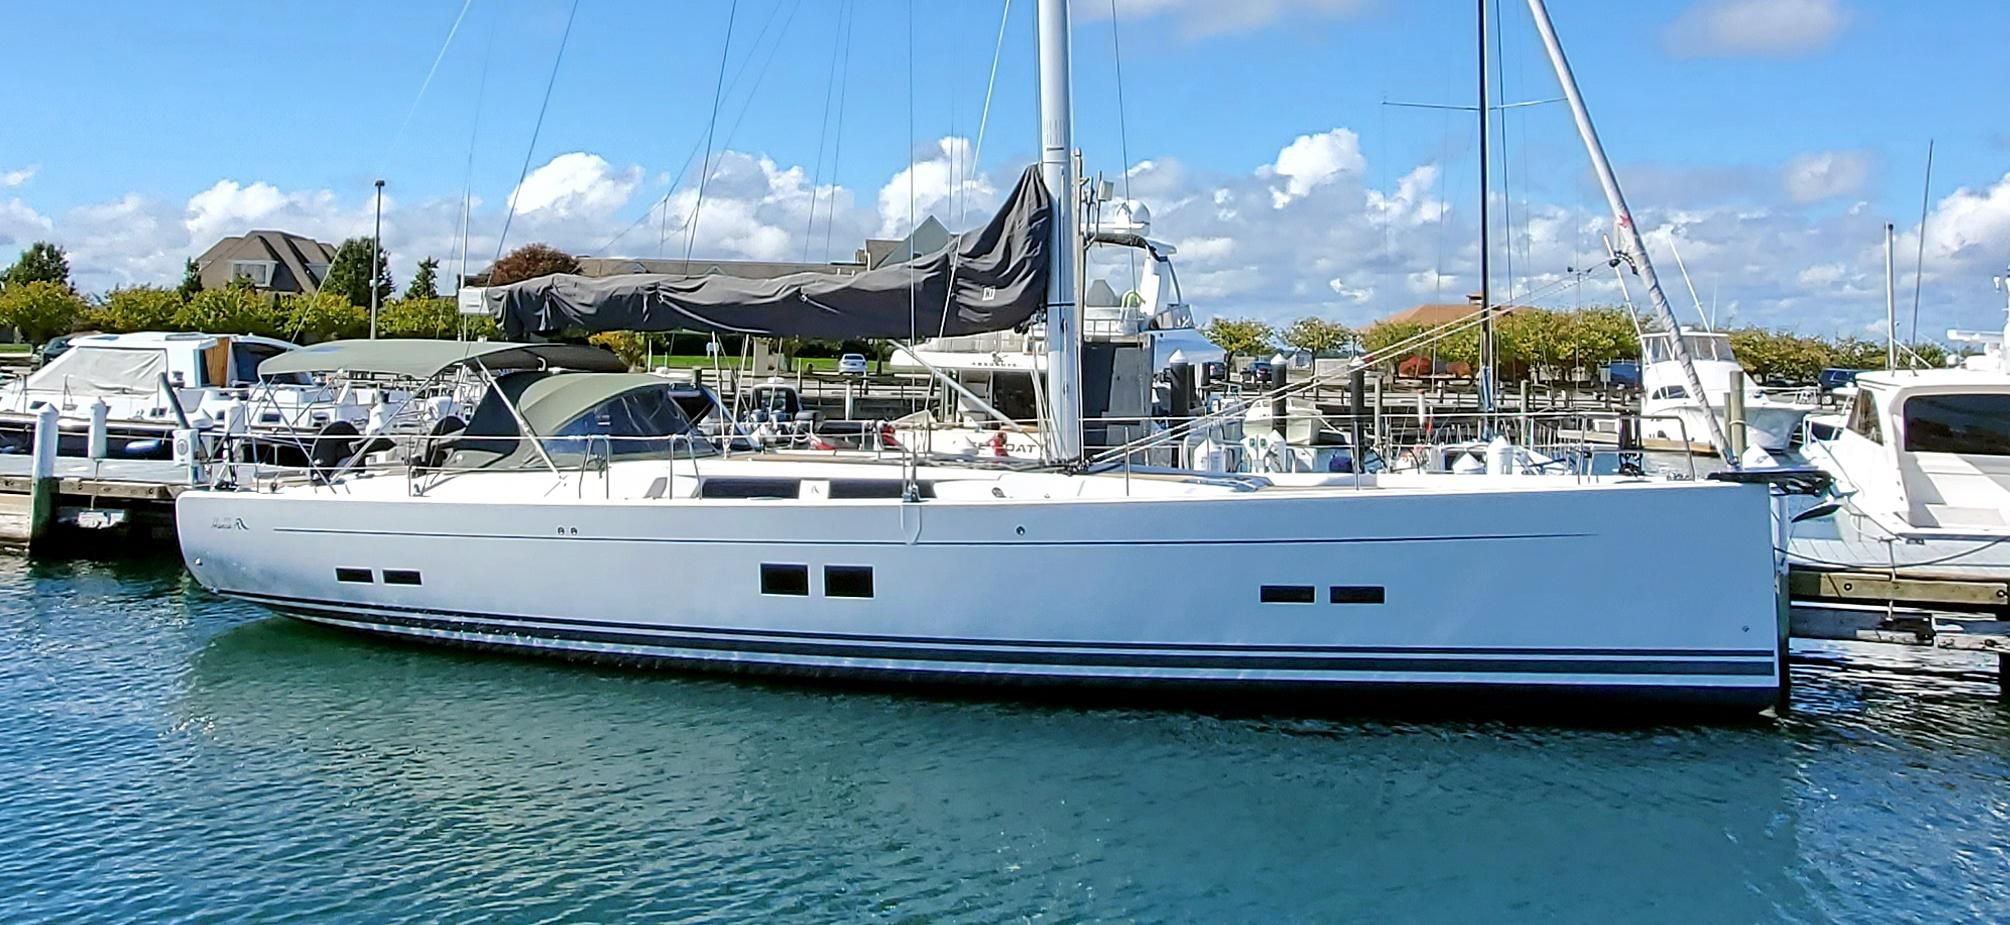 hanse 575 yachts for sale